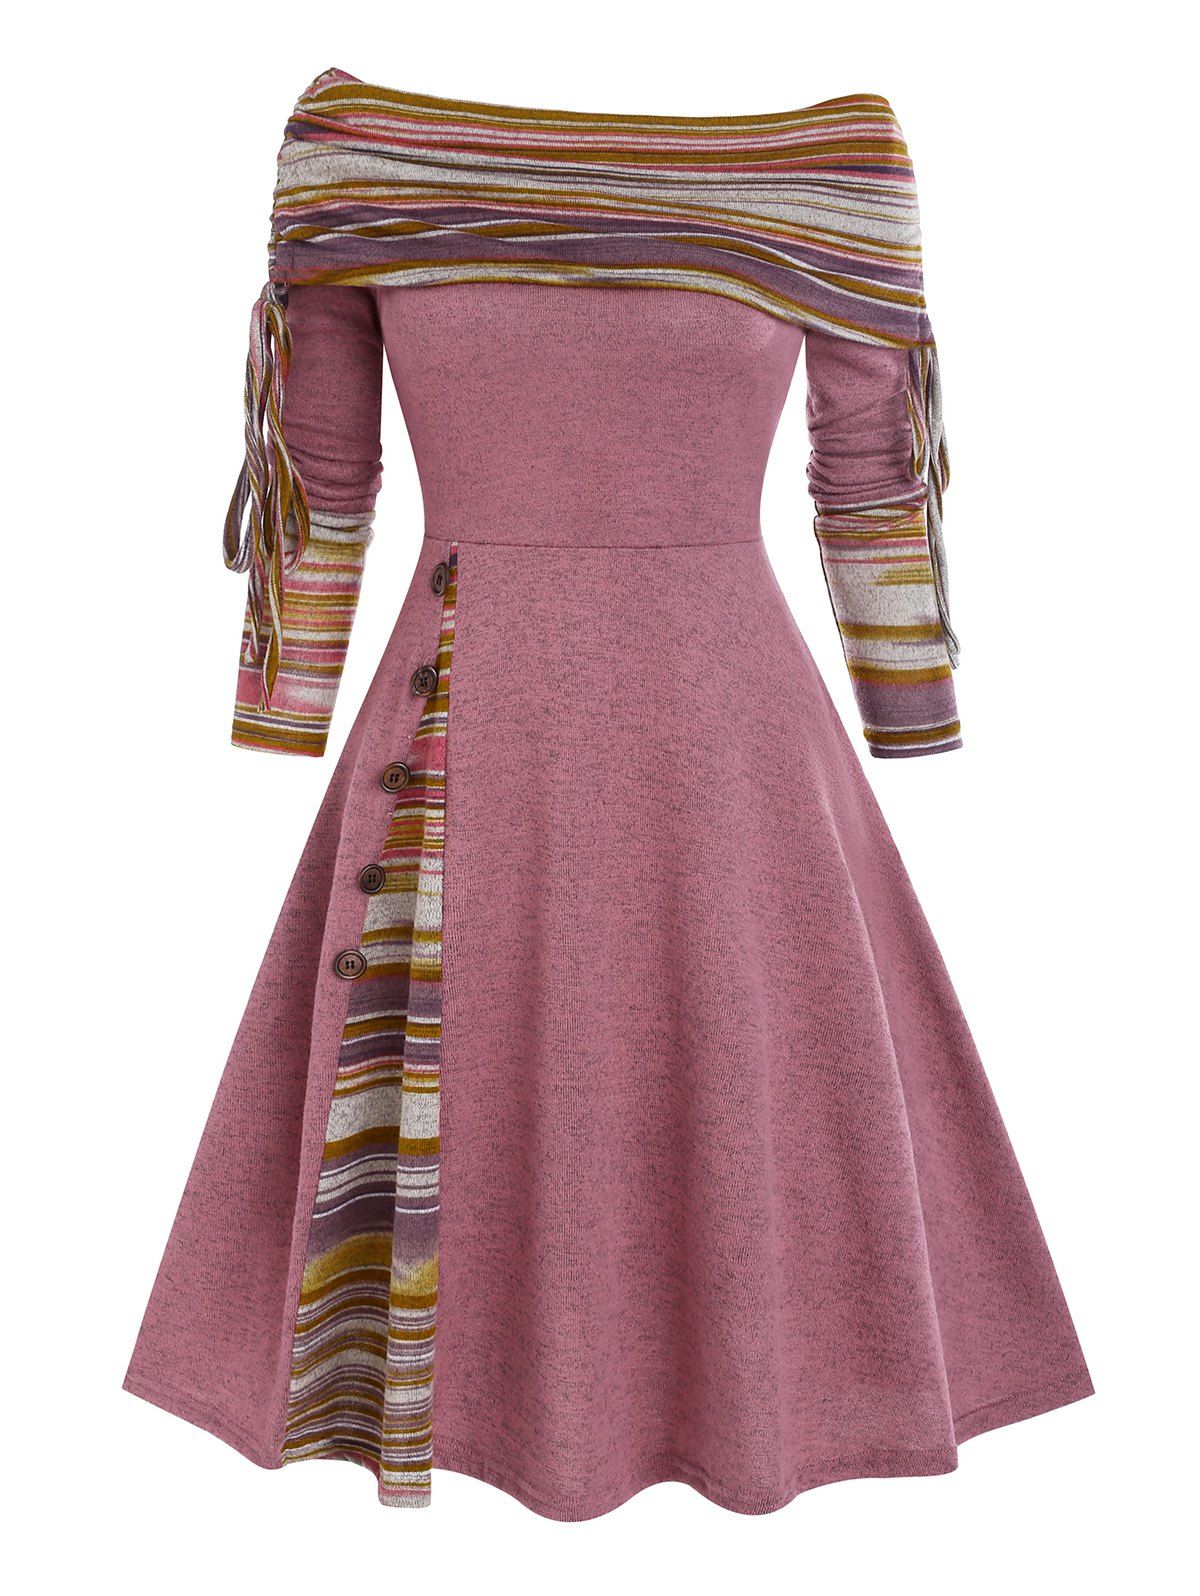 Convertible Neck Cinched Striped Flare Dress - LIGHT PINK XXL